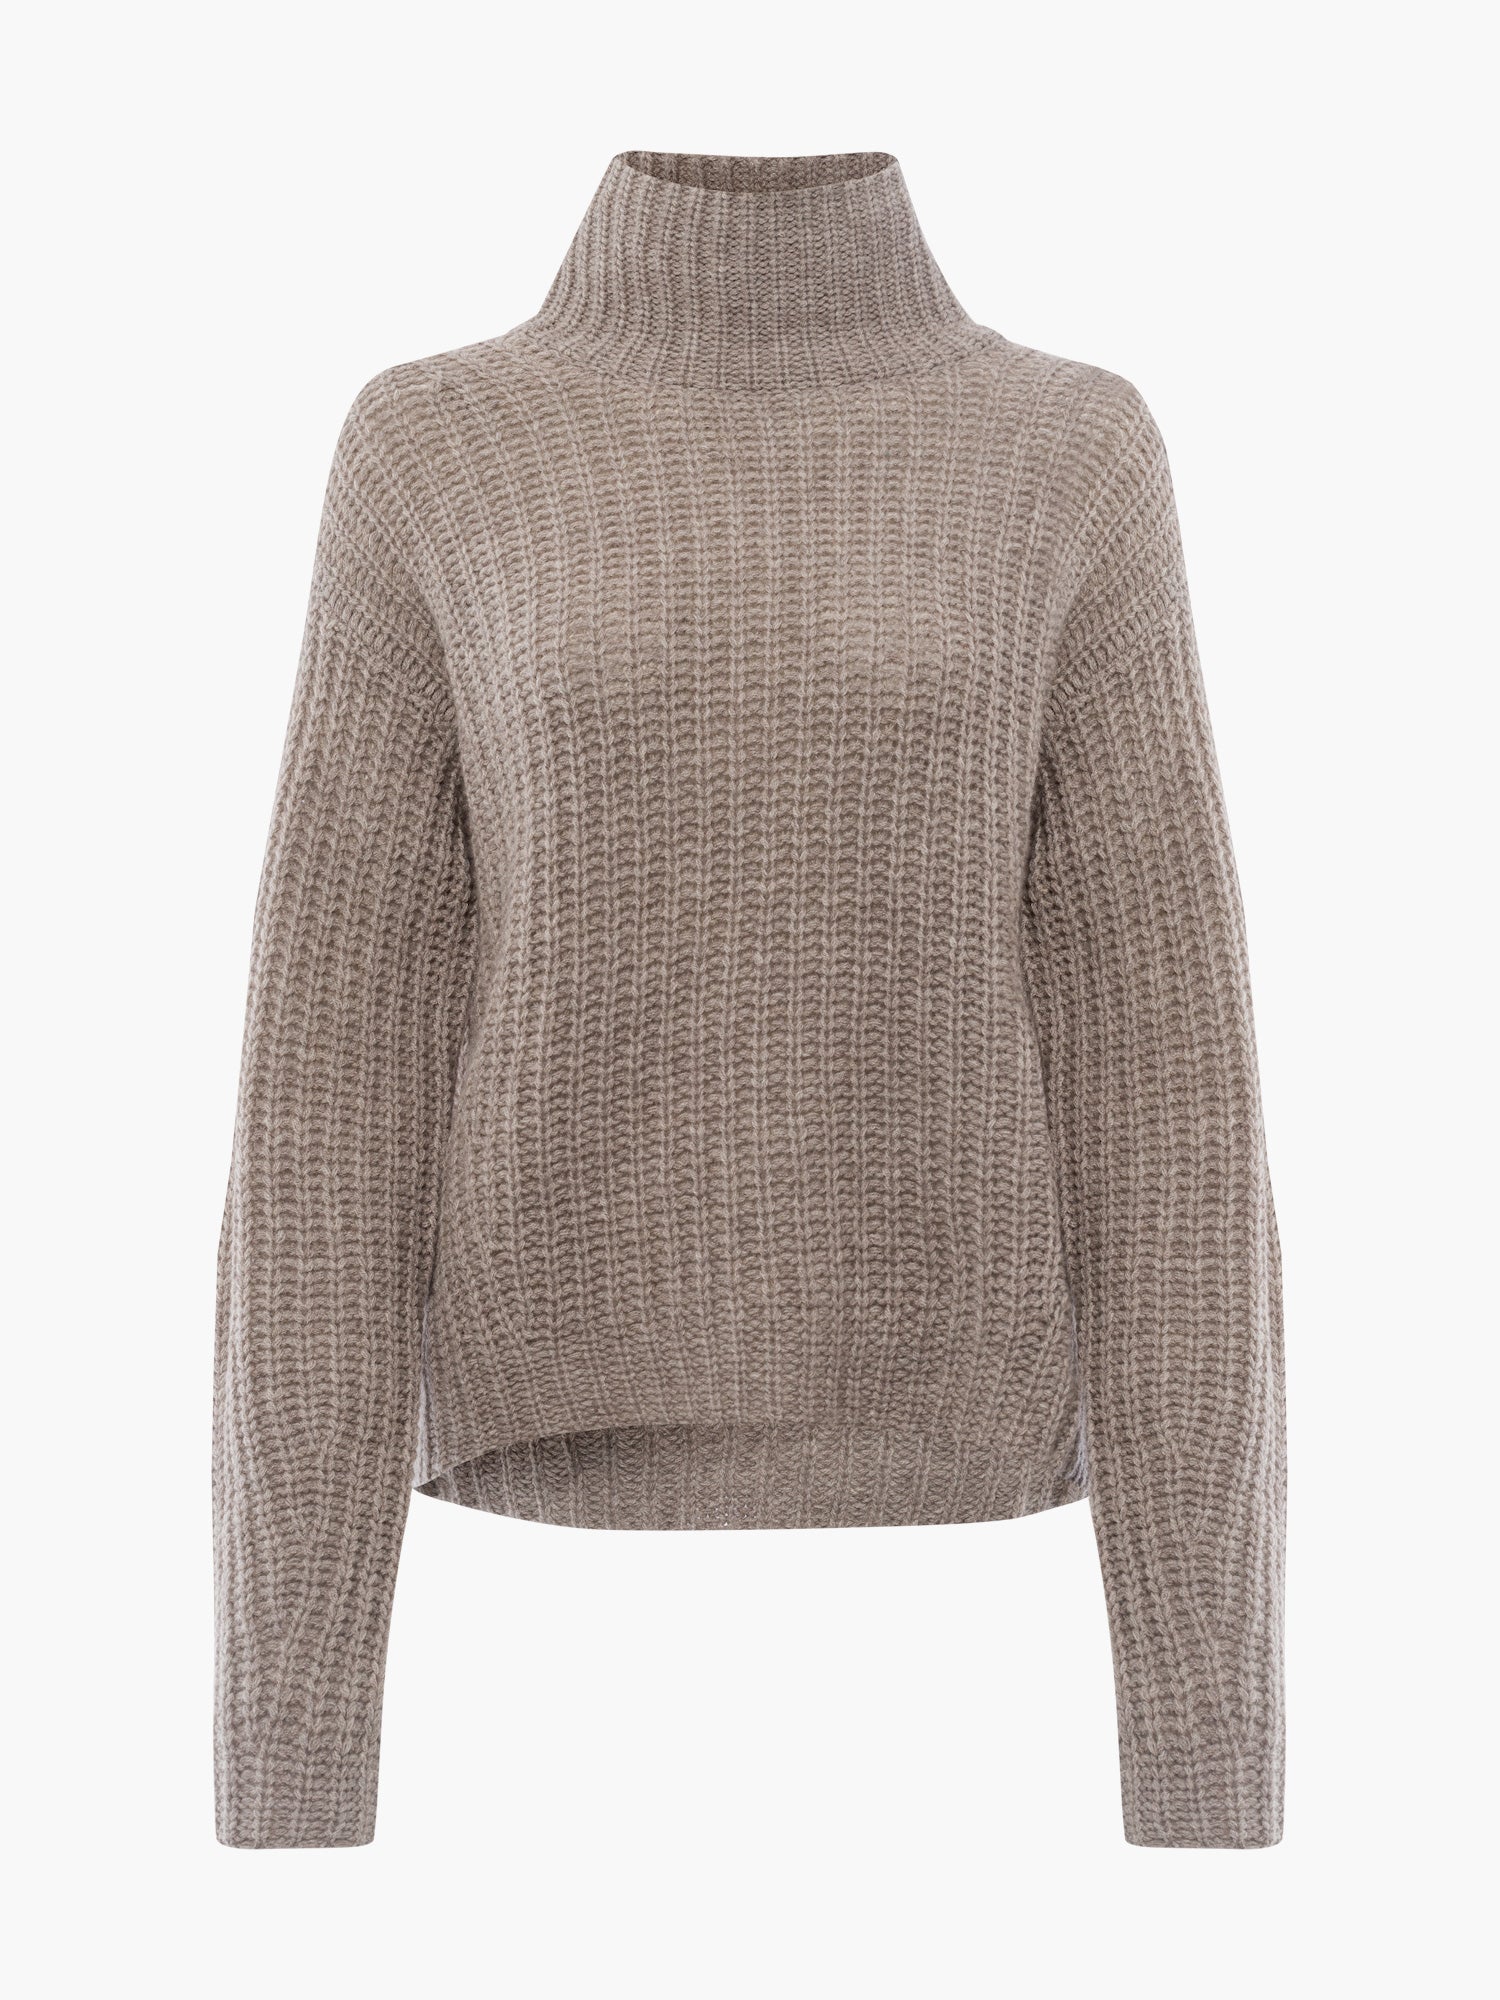 FTC-Cashmere-OUTLET-SALE-Pullover-Highneck-Strick-ARCHIVE-COLLECTION_68620e3d-29c3-45b0-967a-a0be89bdbce5.jpg